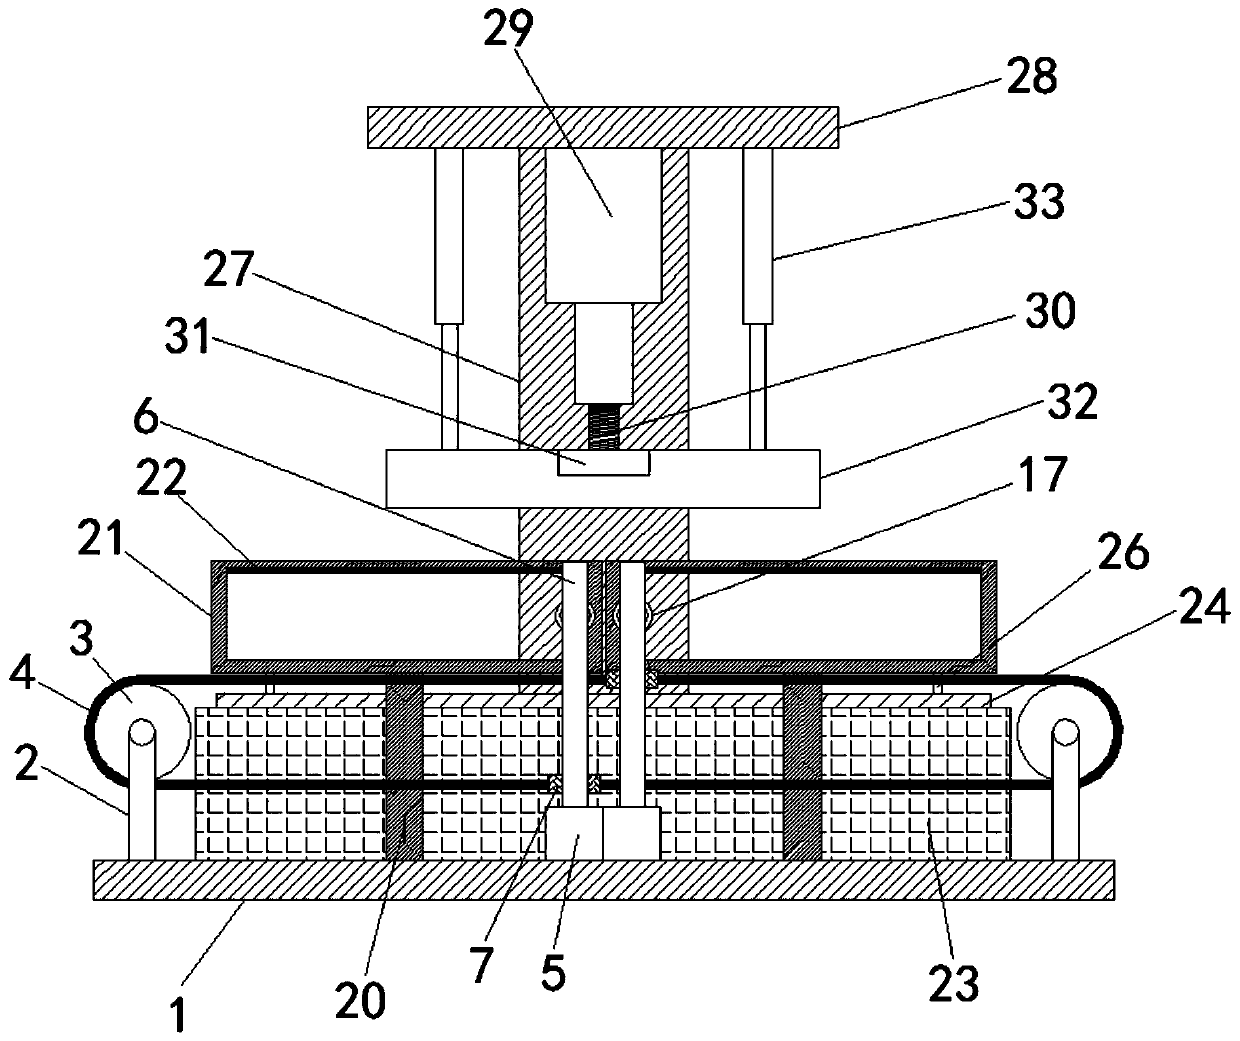 Press-ironing device for garment production and capable of increasing yield